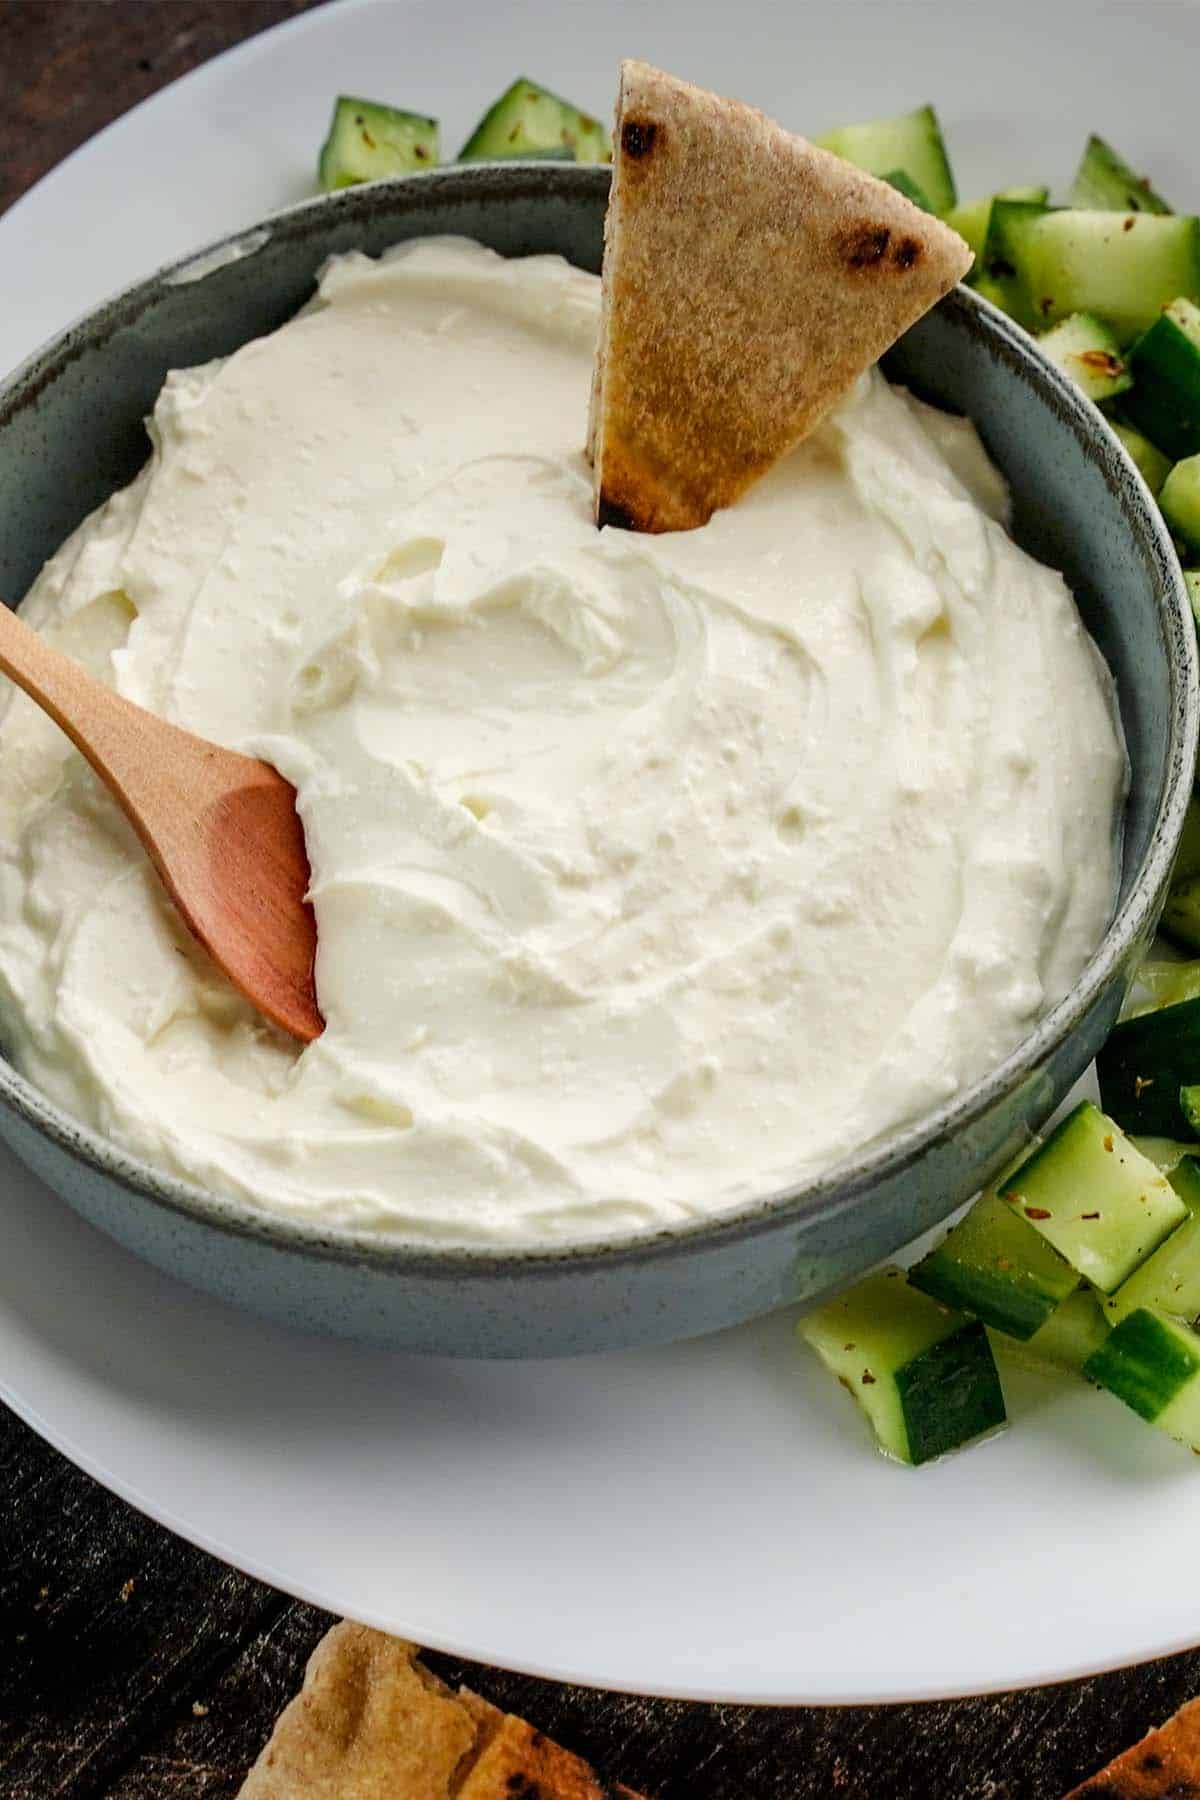 Whipped Feta Dip with pita chips